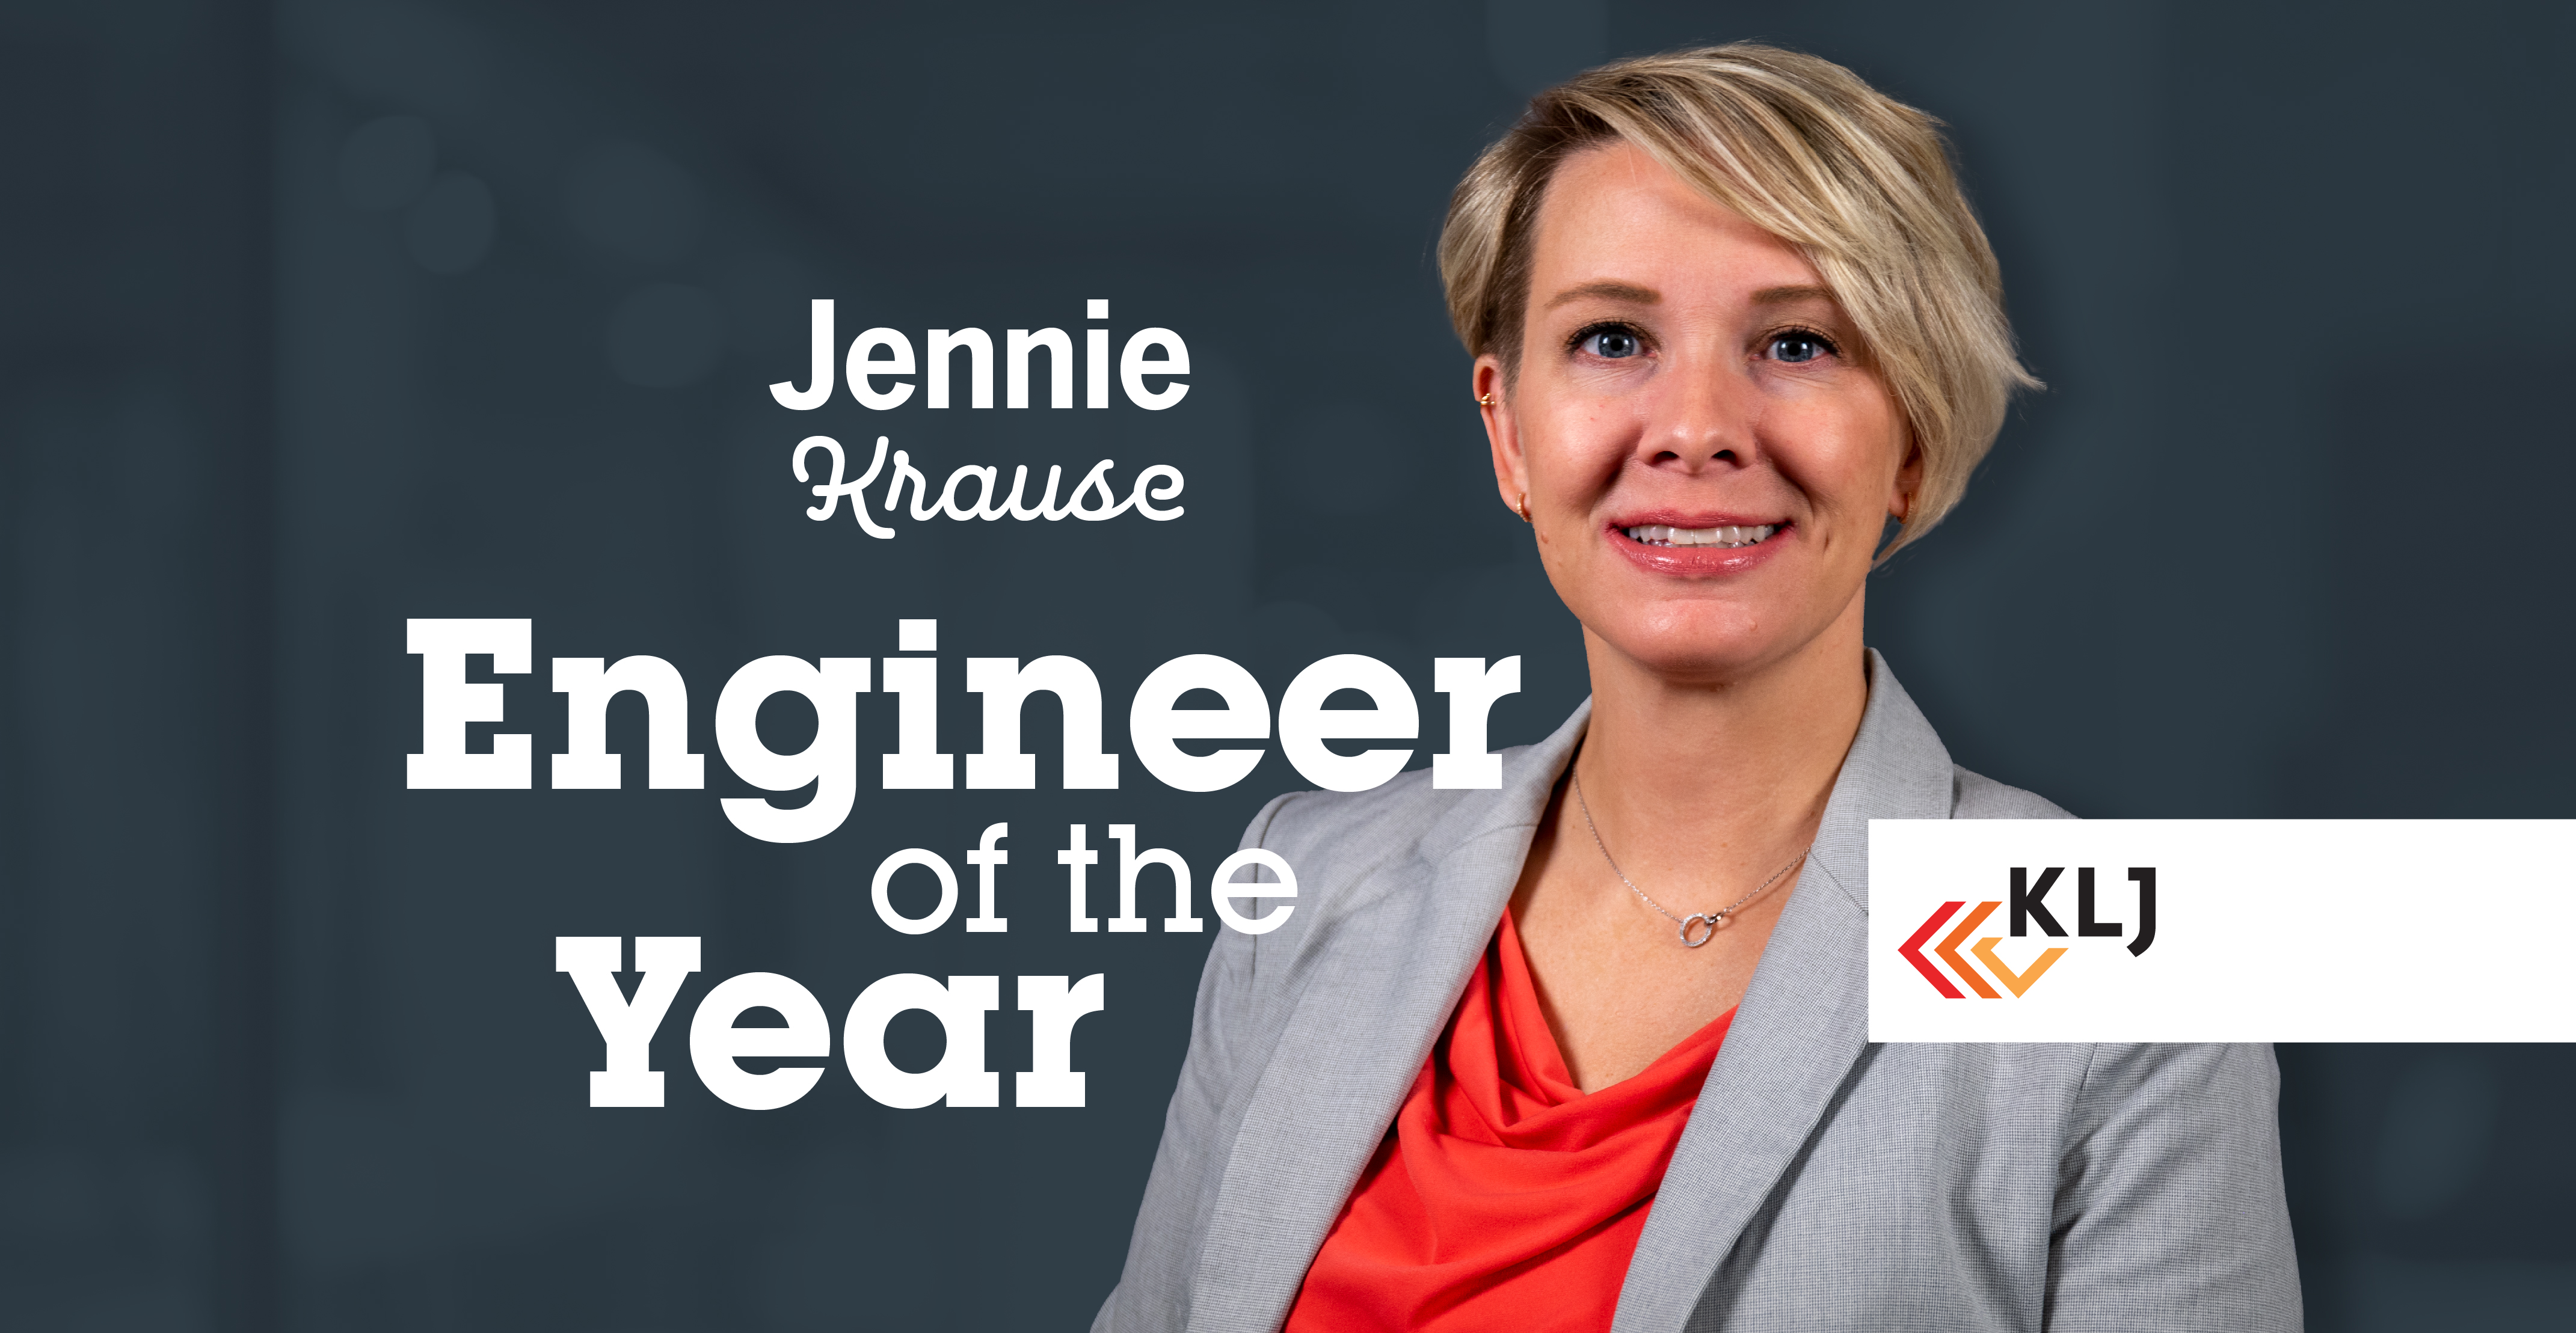 NDACE Names Jennie Krause Engineer of the Year